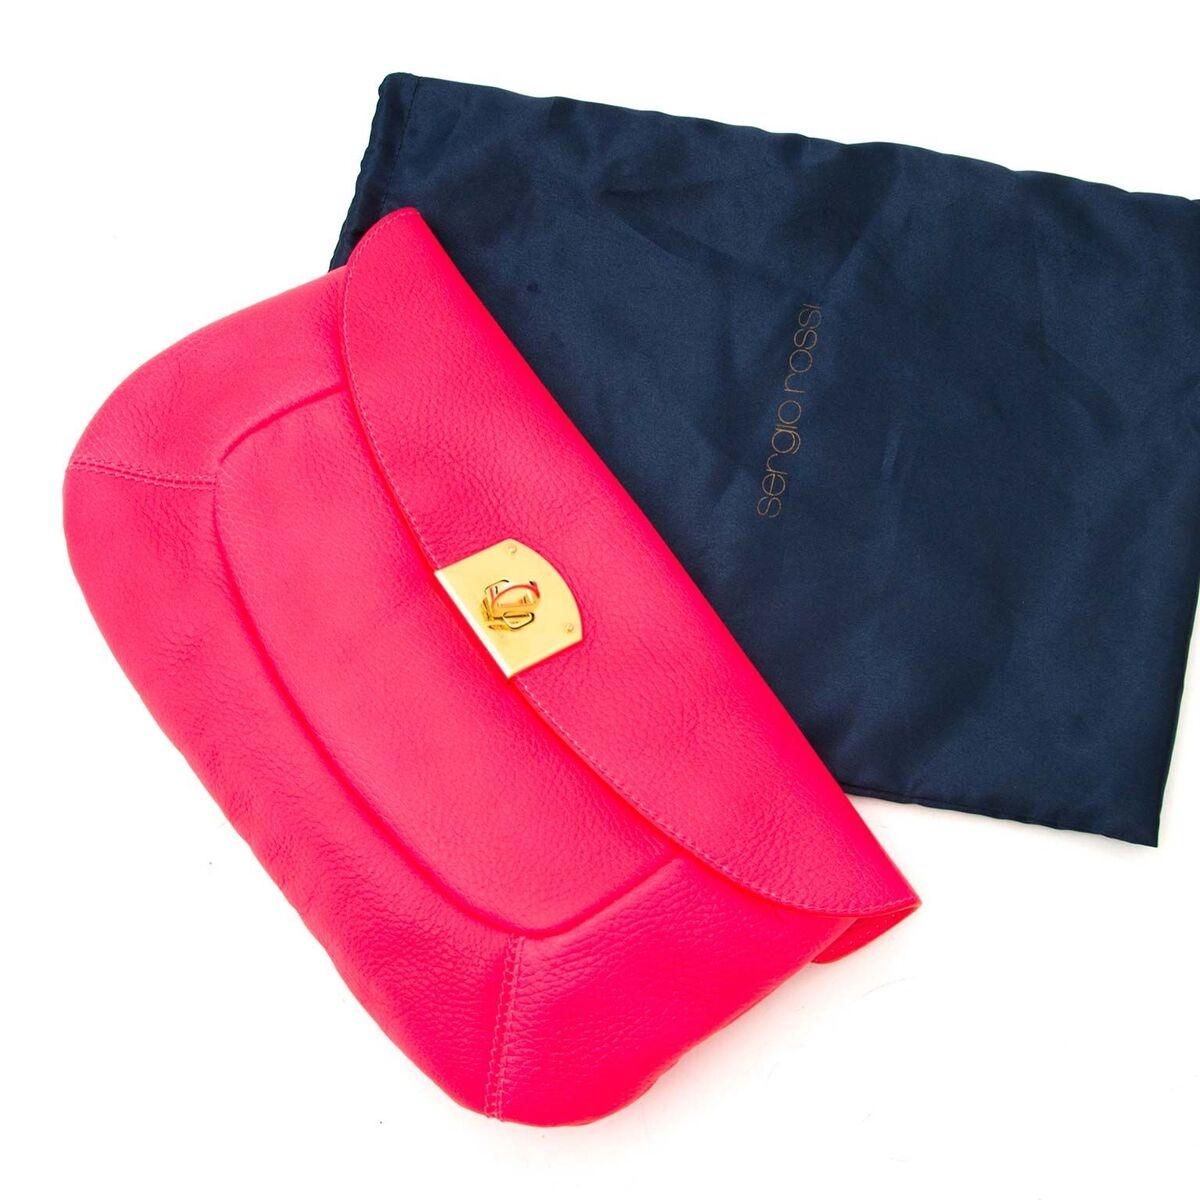 Excellent condition

Sergio Rossi Neon Pink Clutch

Nothing says more 